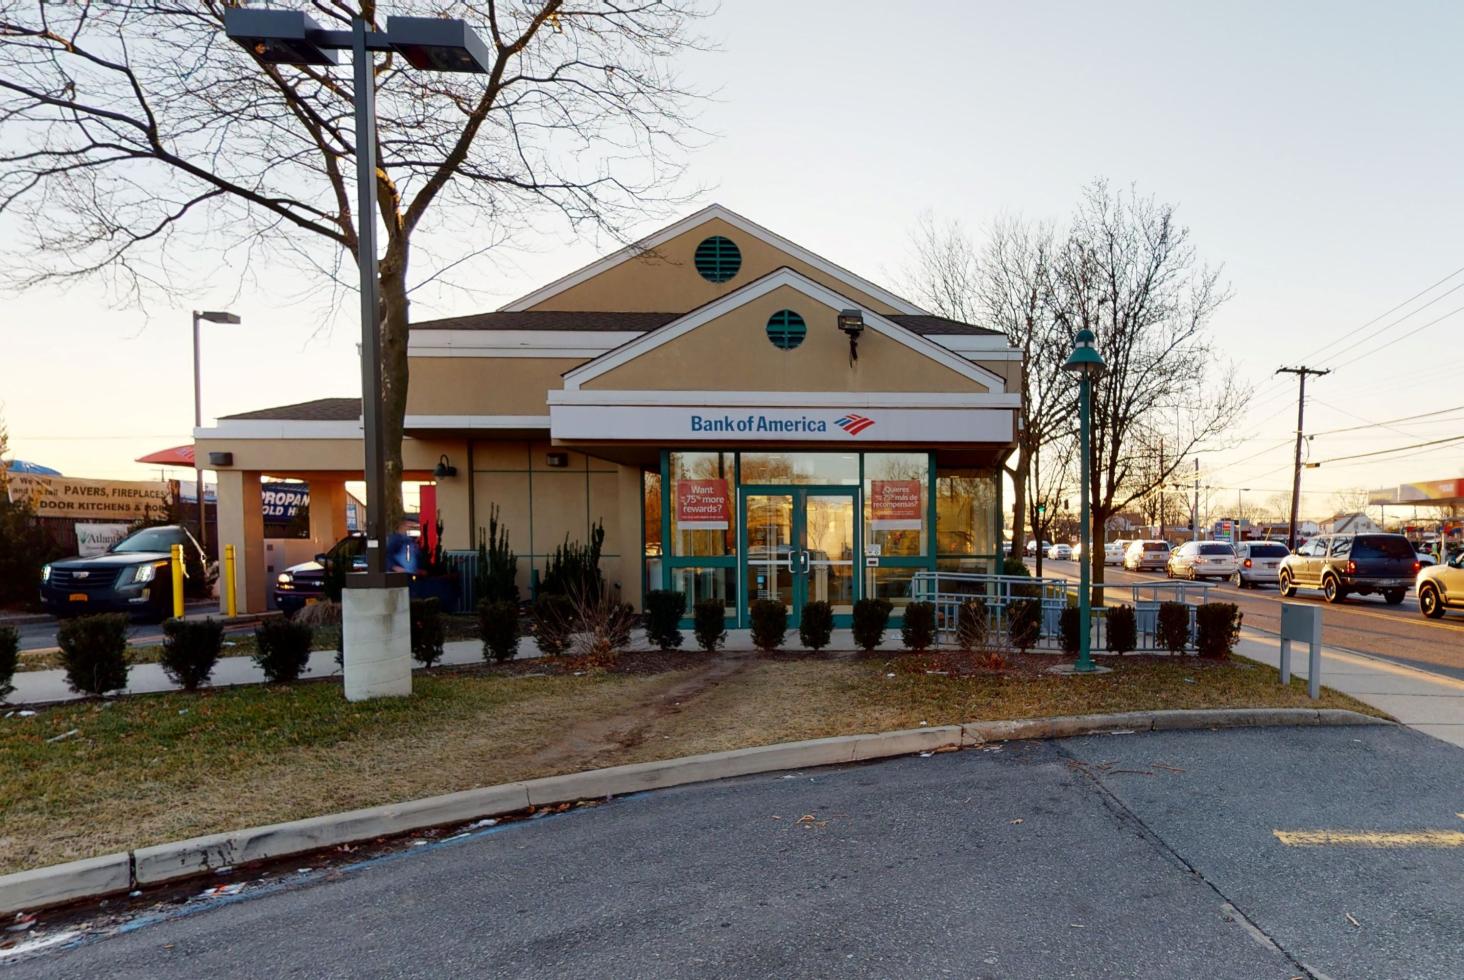 Bank of America financial center with drive-thru ATM | 1979 Deer Park Ave, Deer Park, NY 11729